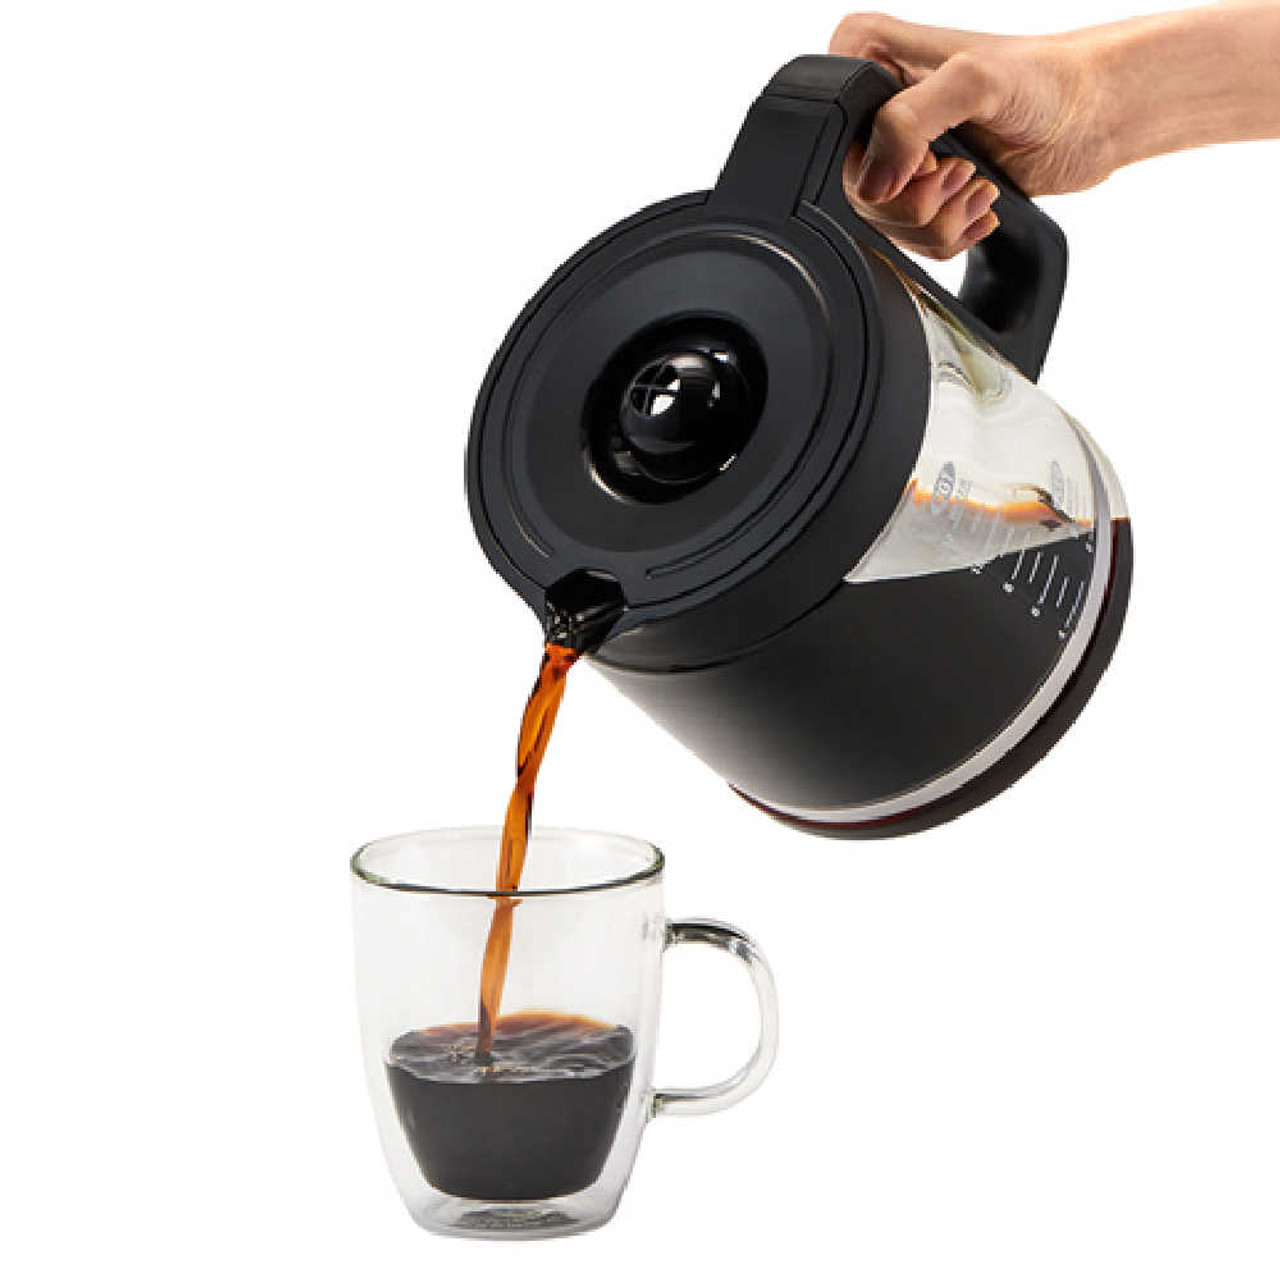 https://cdn11.bigcommerce.com/s-hccytny0od/images/stencil/1280x1280/products/5378/23359/Zojirushi_Dome_Brew_Classic_Coffee_Maker_3__24034.1681233863.jpg?c=2?imbypass=on